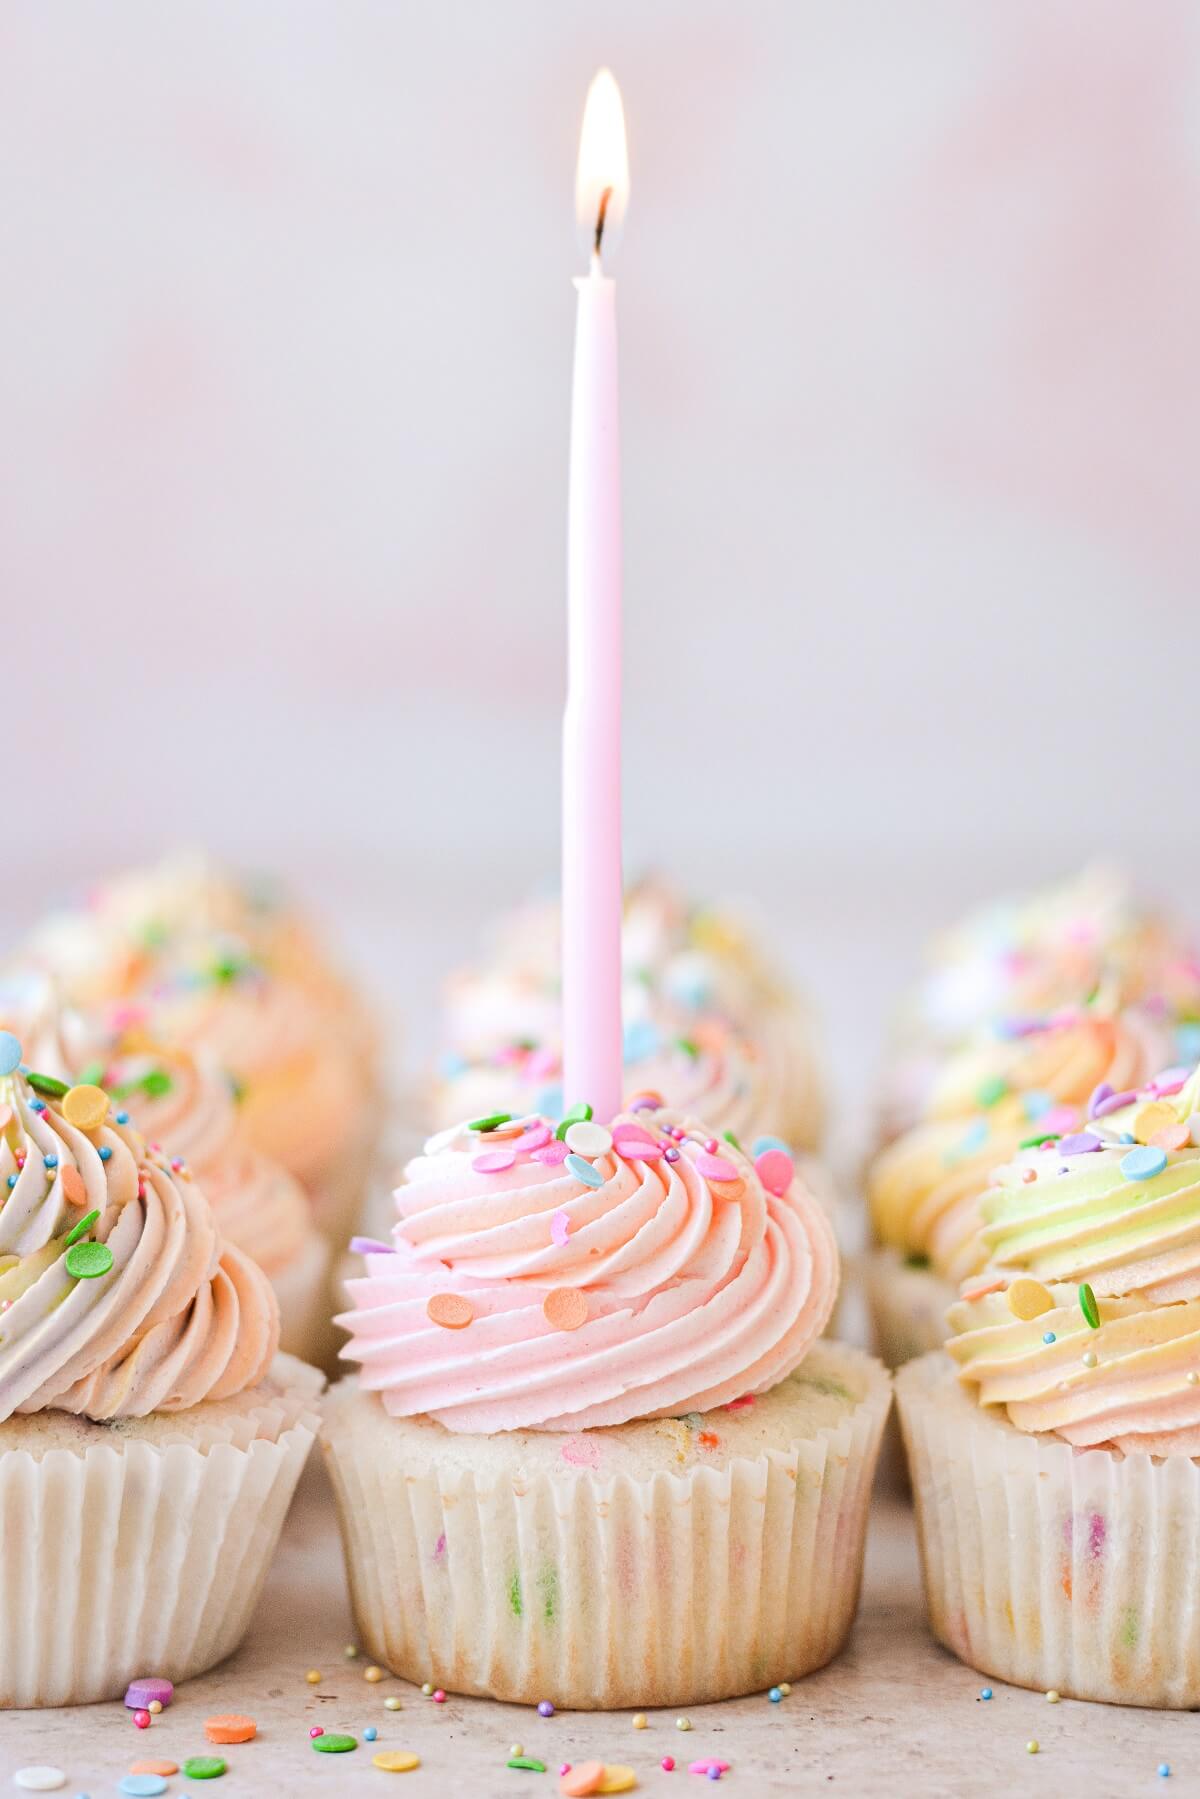 Funfetti cupcakes with sprinkles and a pink candle.